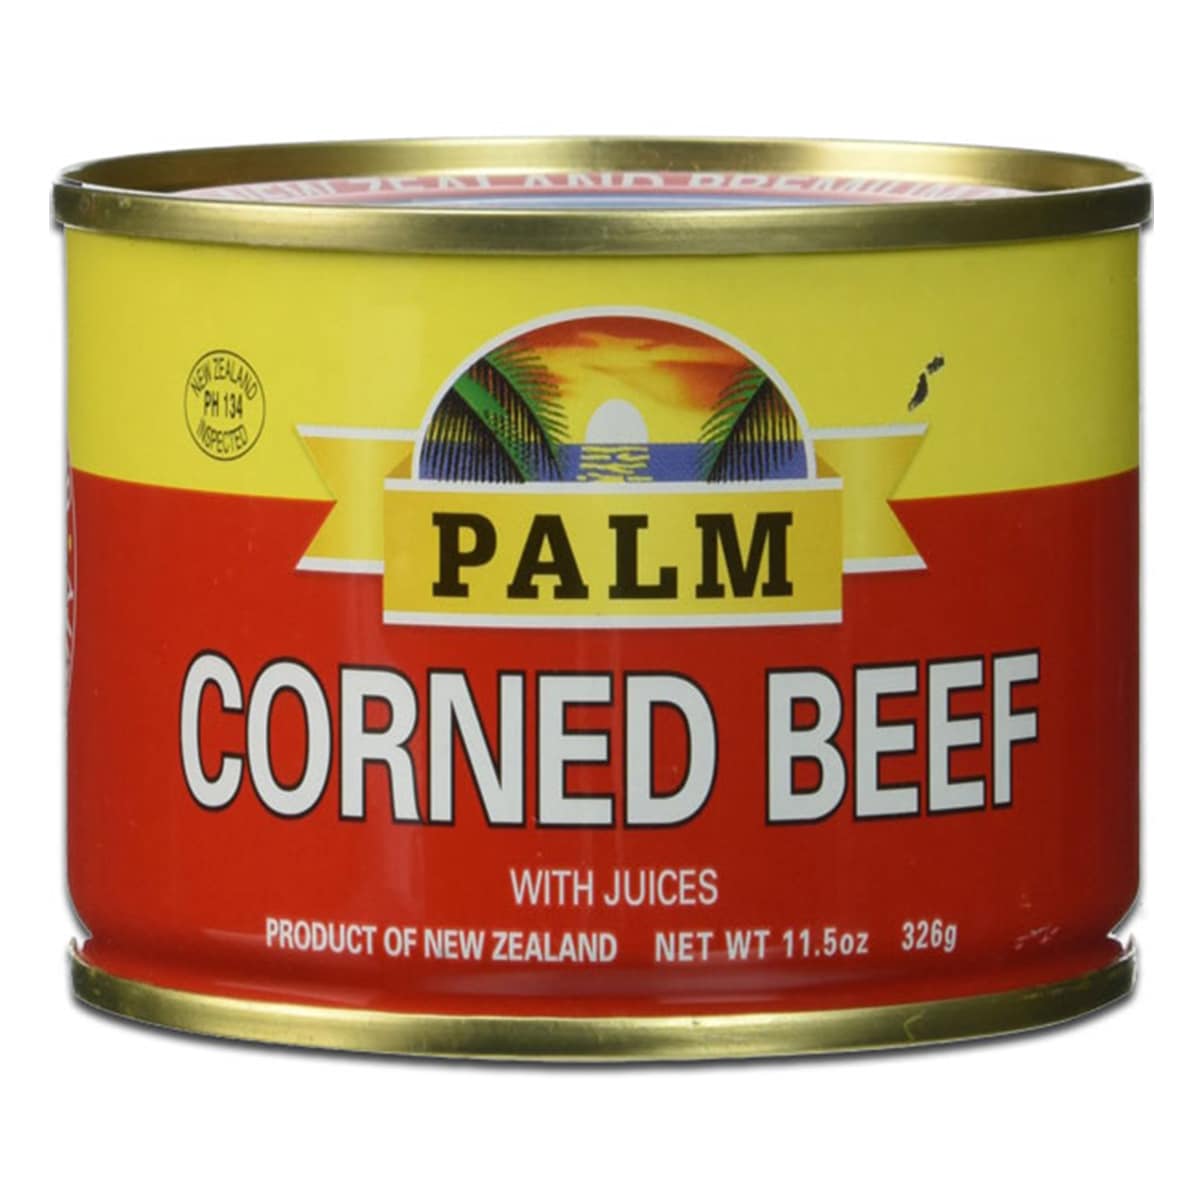 Buy Palm Corned Beef with Juices - 326 gm